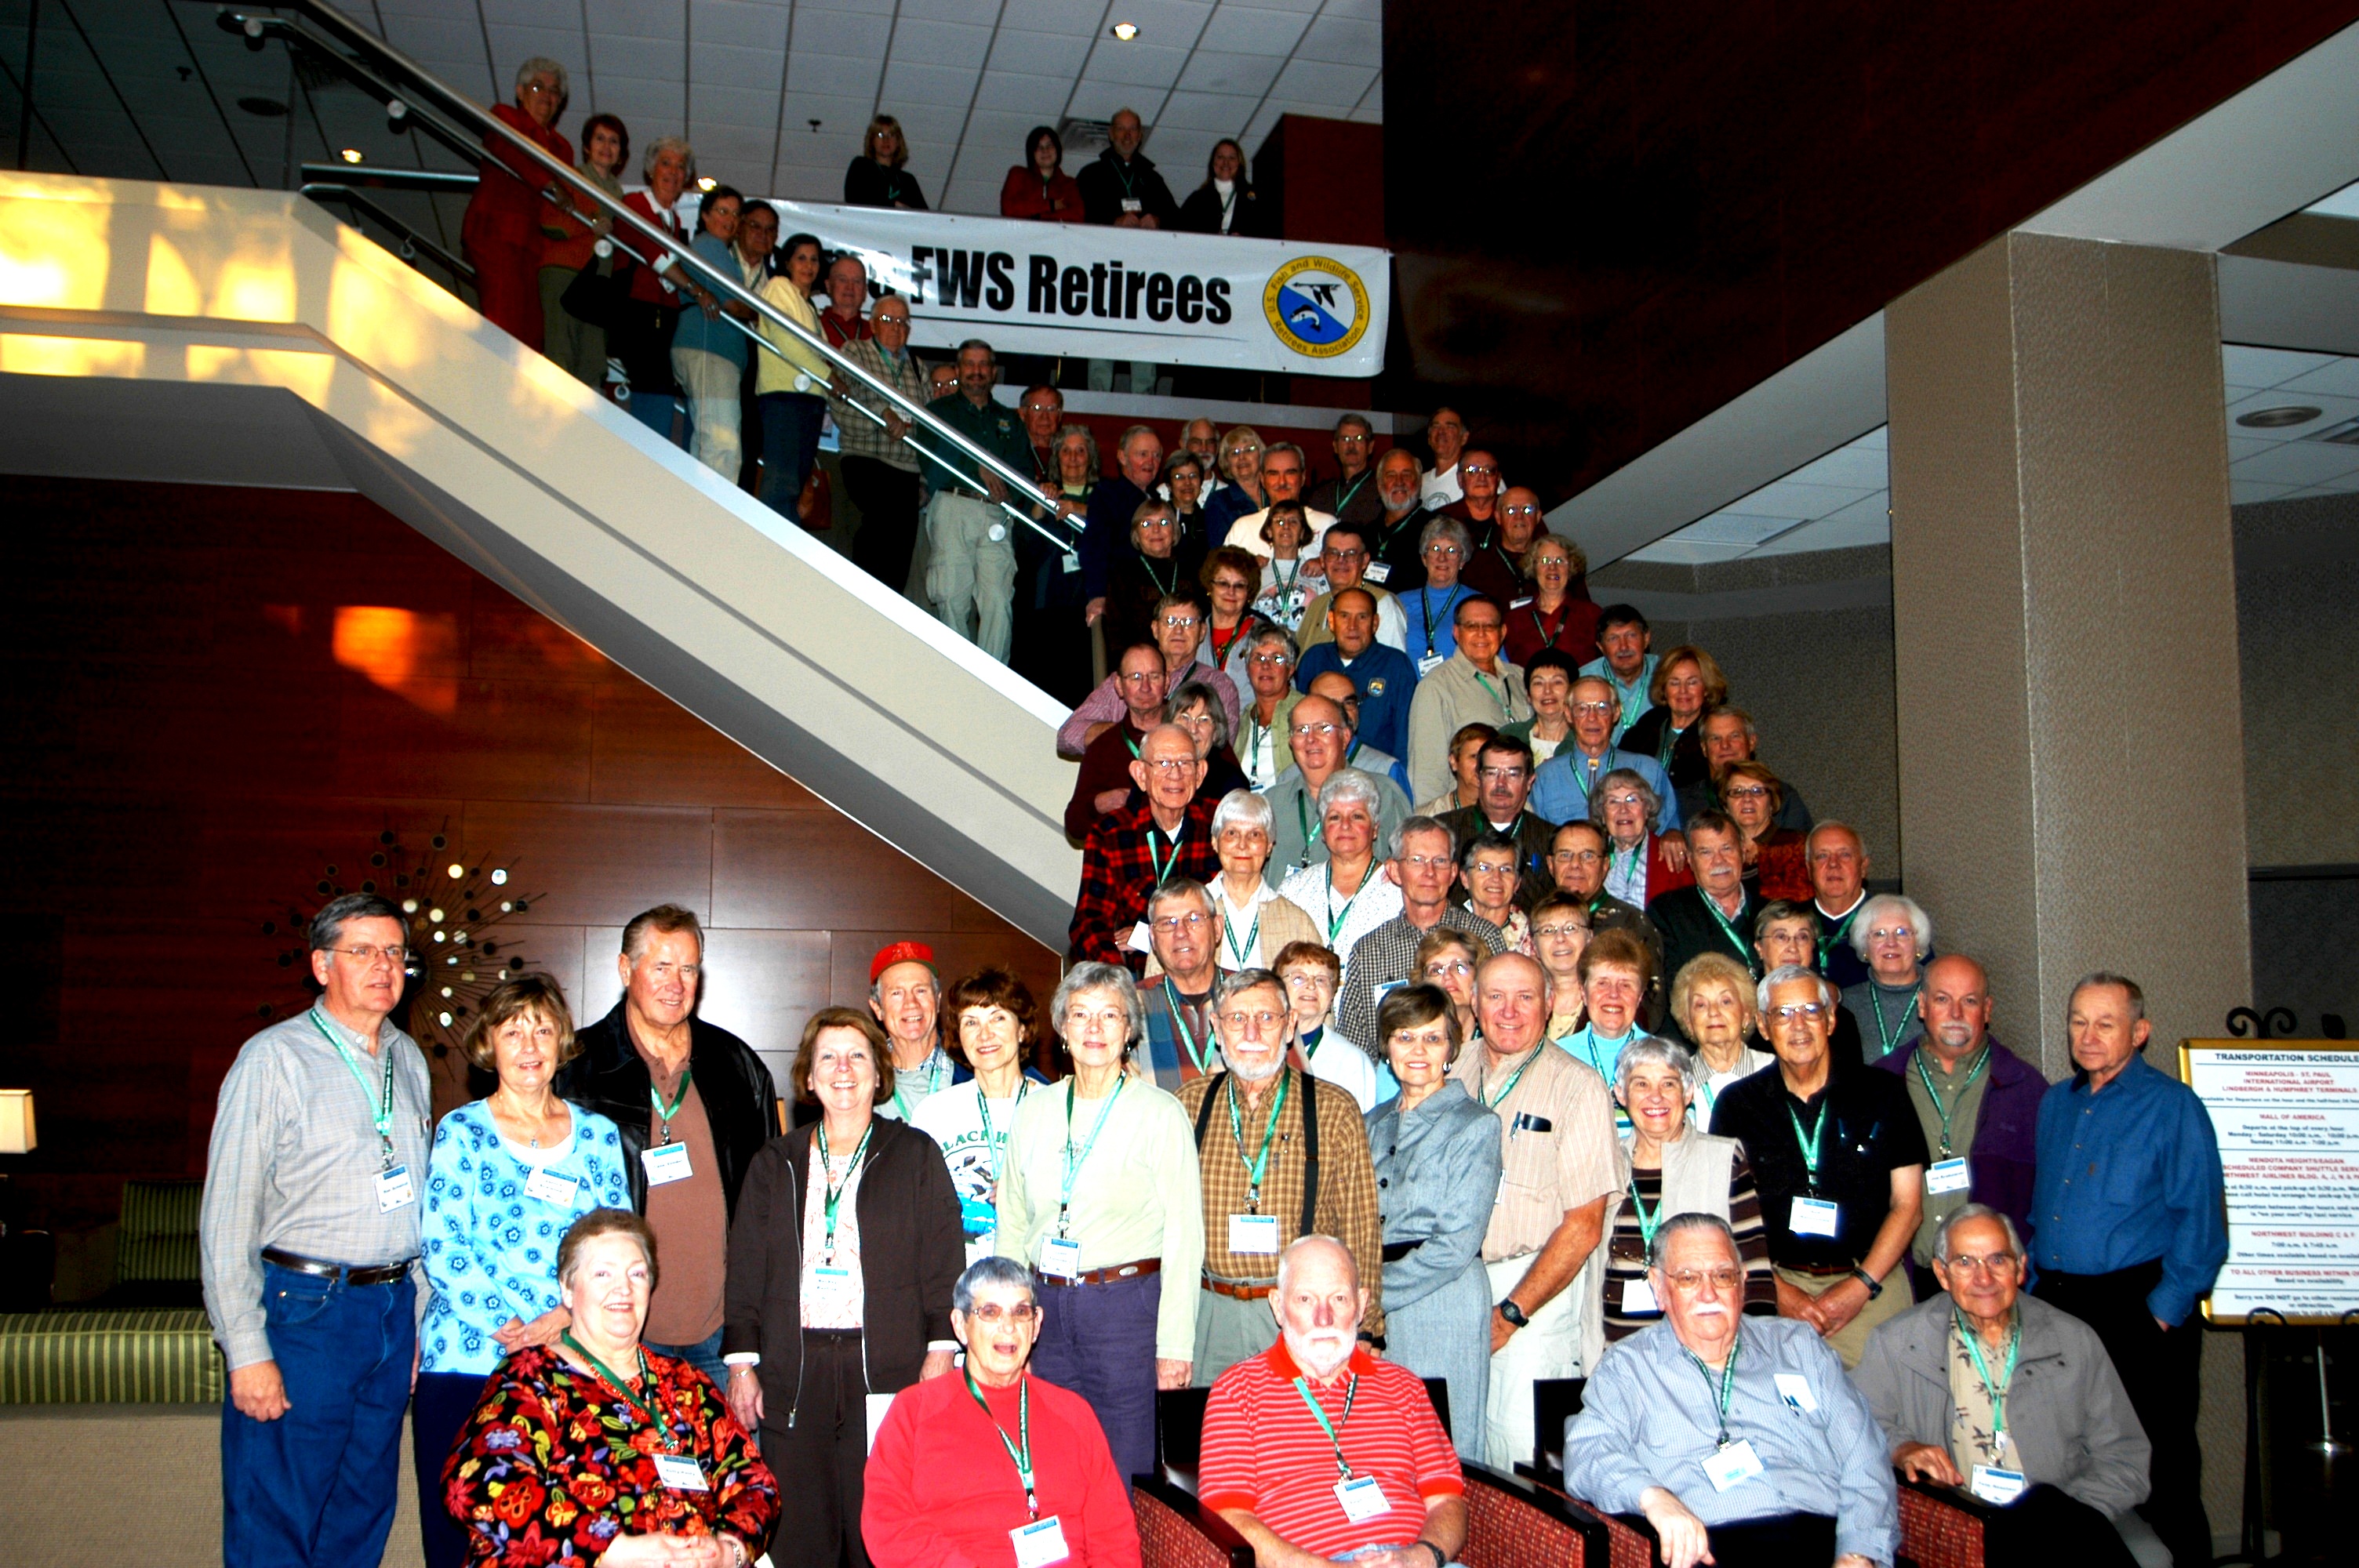 2008 Attendees